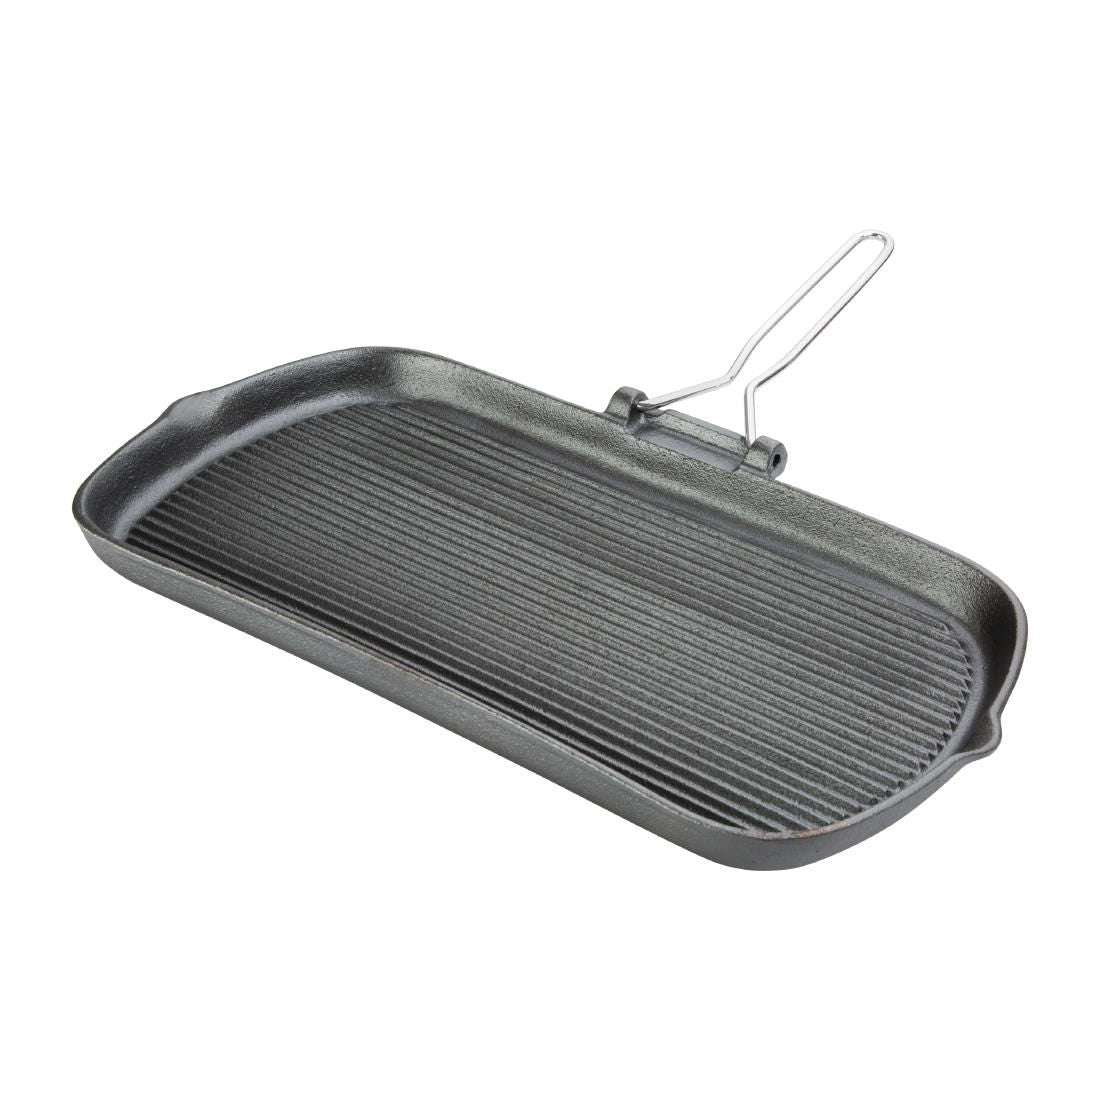 Vogue Cast Iron Grill Pan - K417 Oven to Table Vogue   